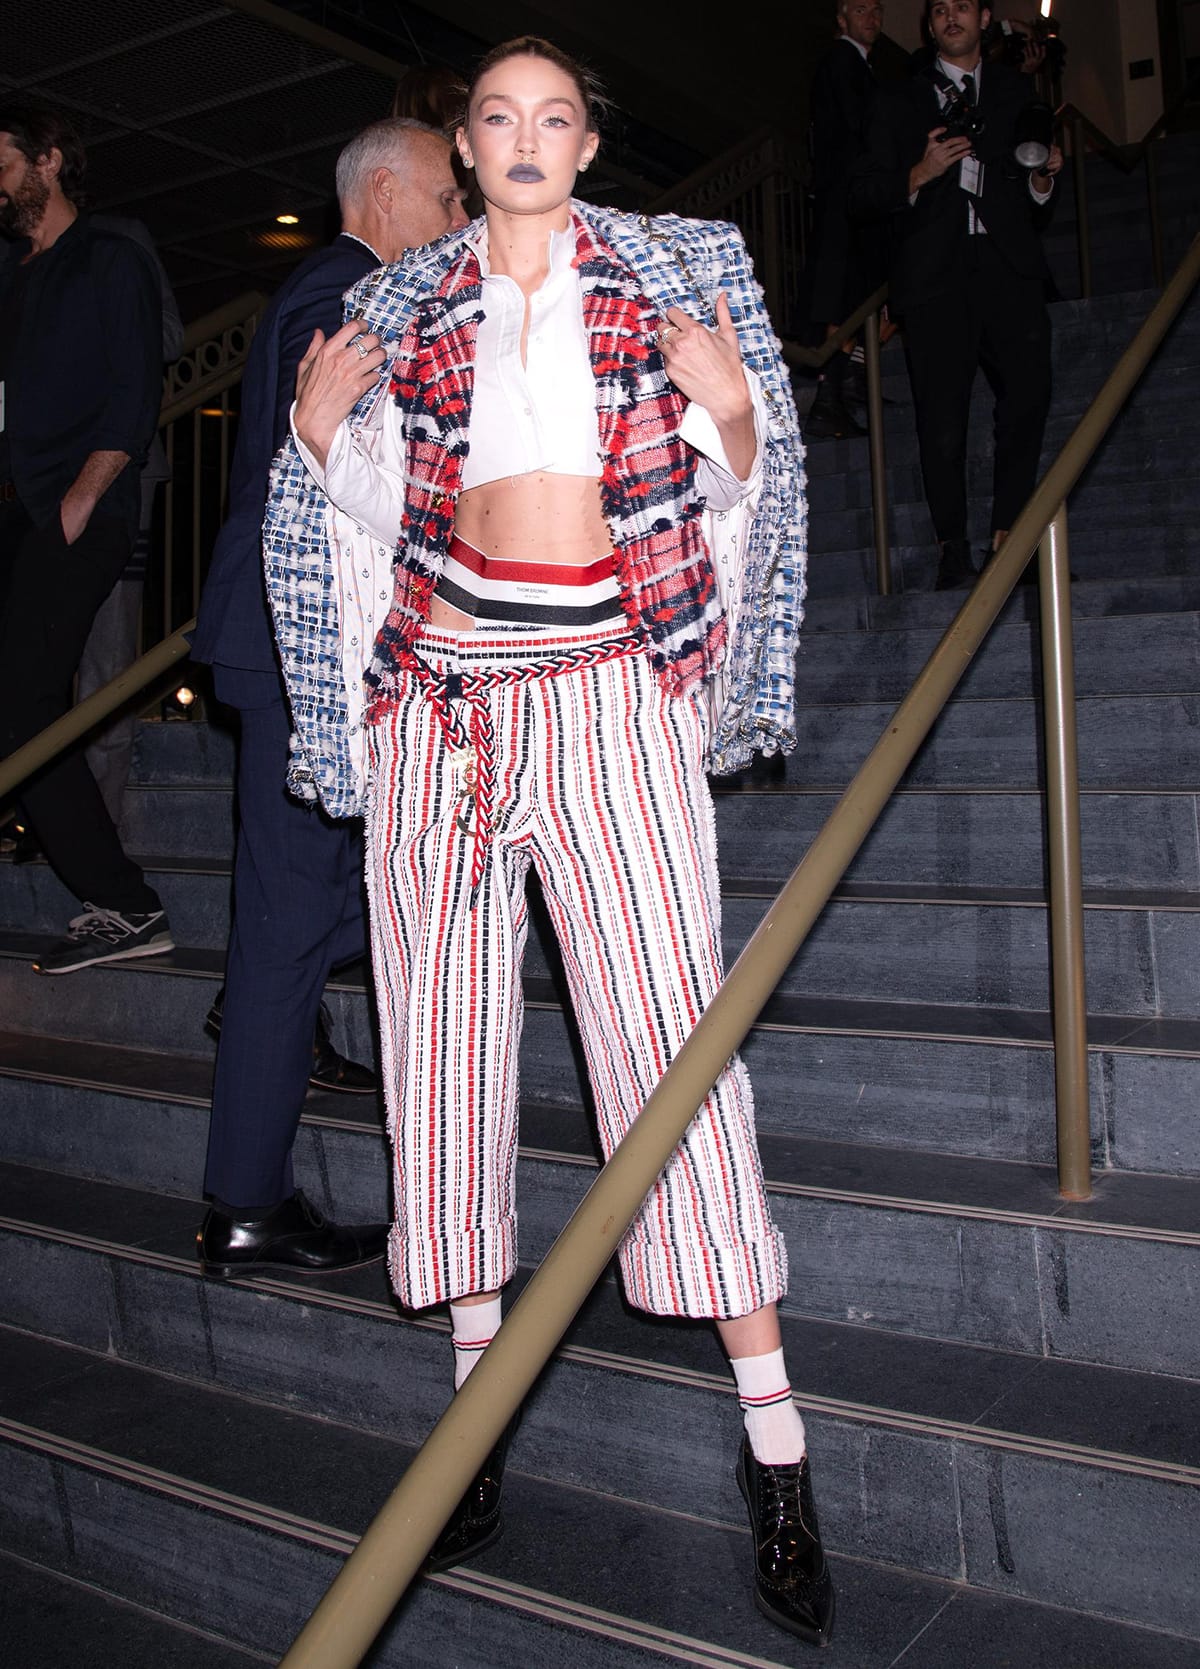 Gigi Hadid attends the 2022 CFDA Fashion Awards without her rumored new beau Leonardo DiCaprio on November 7, 2022